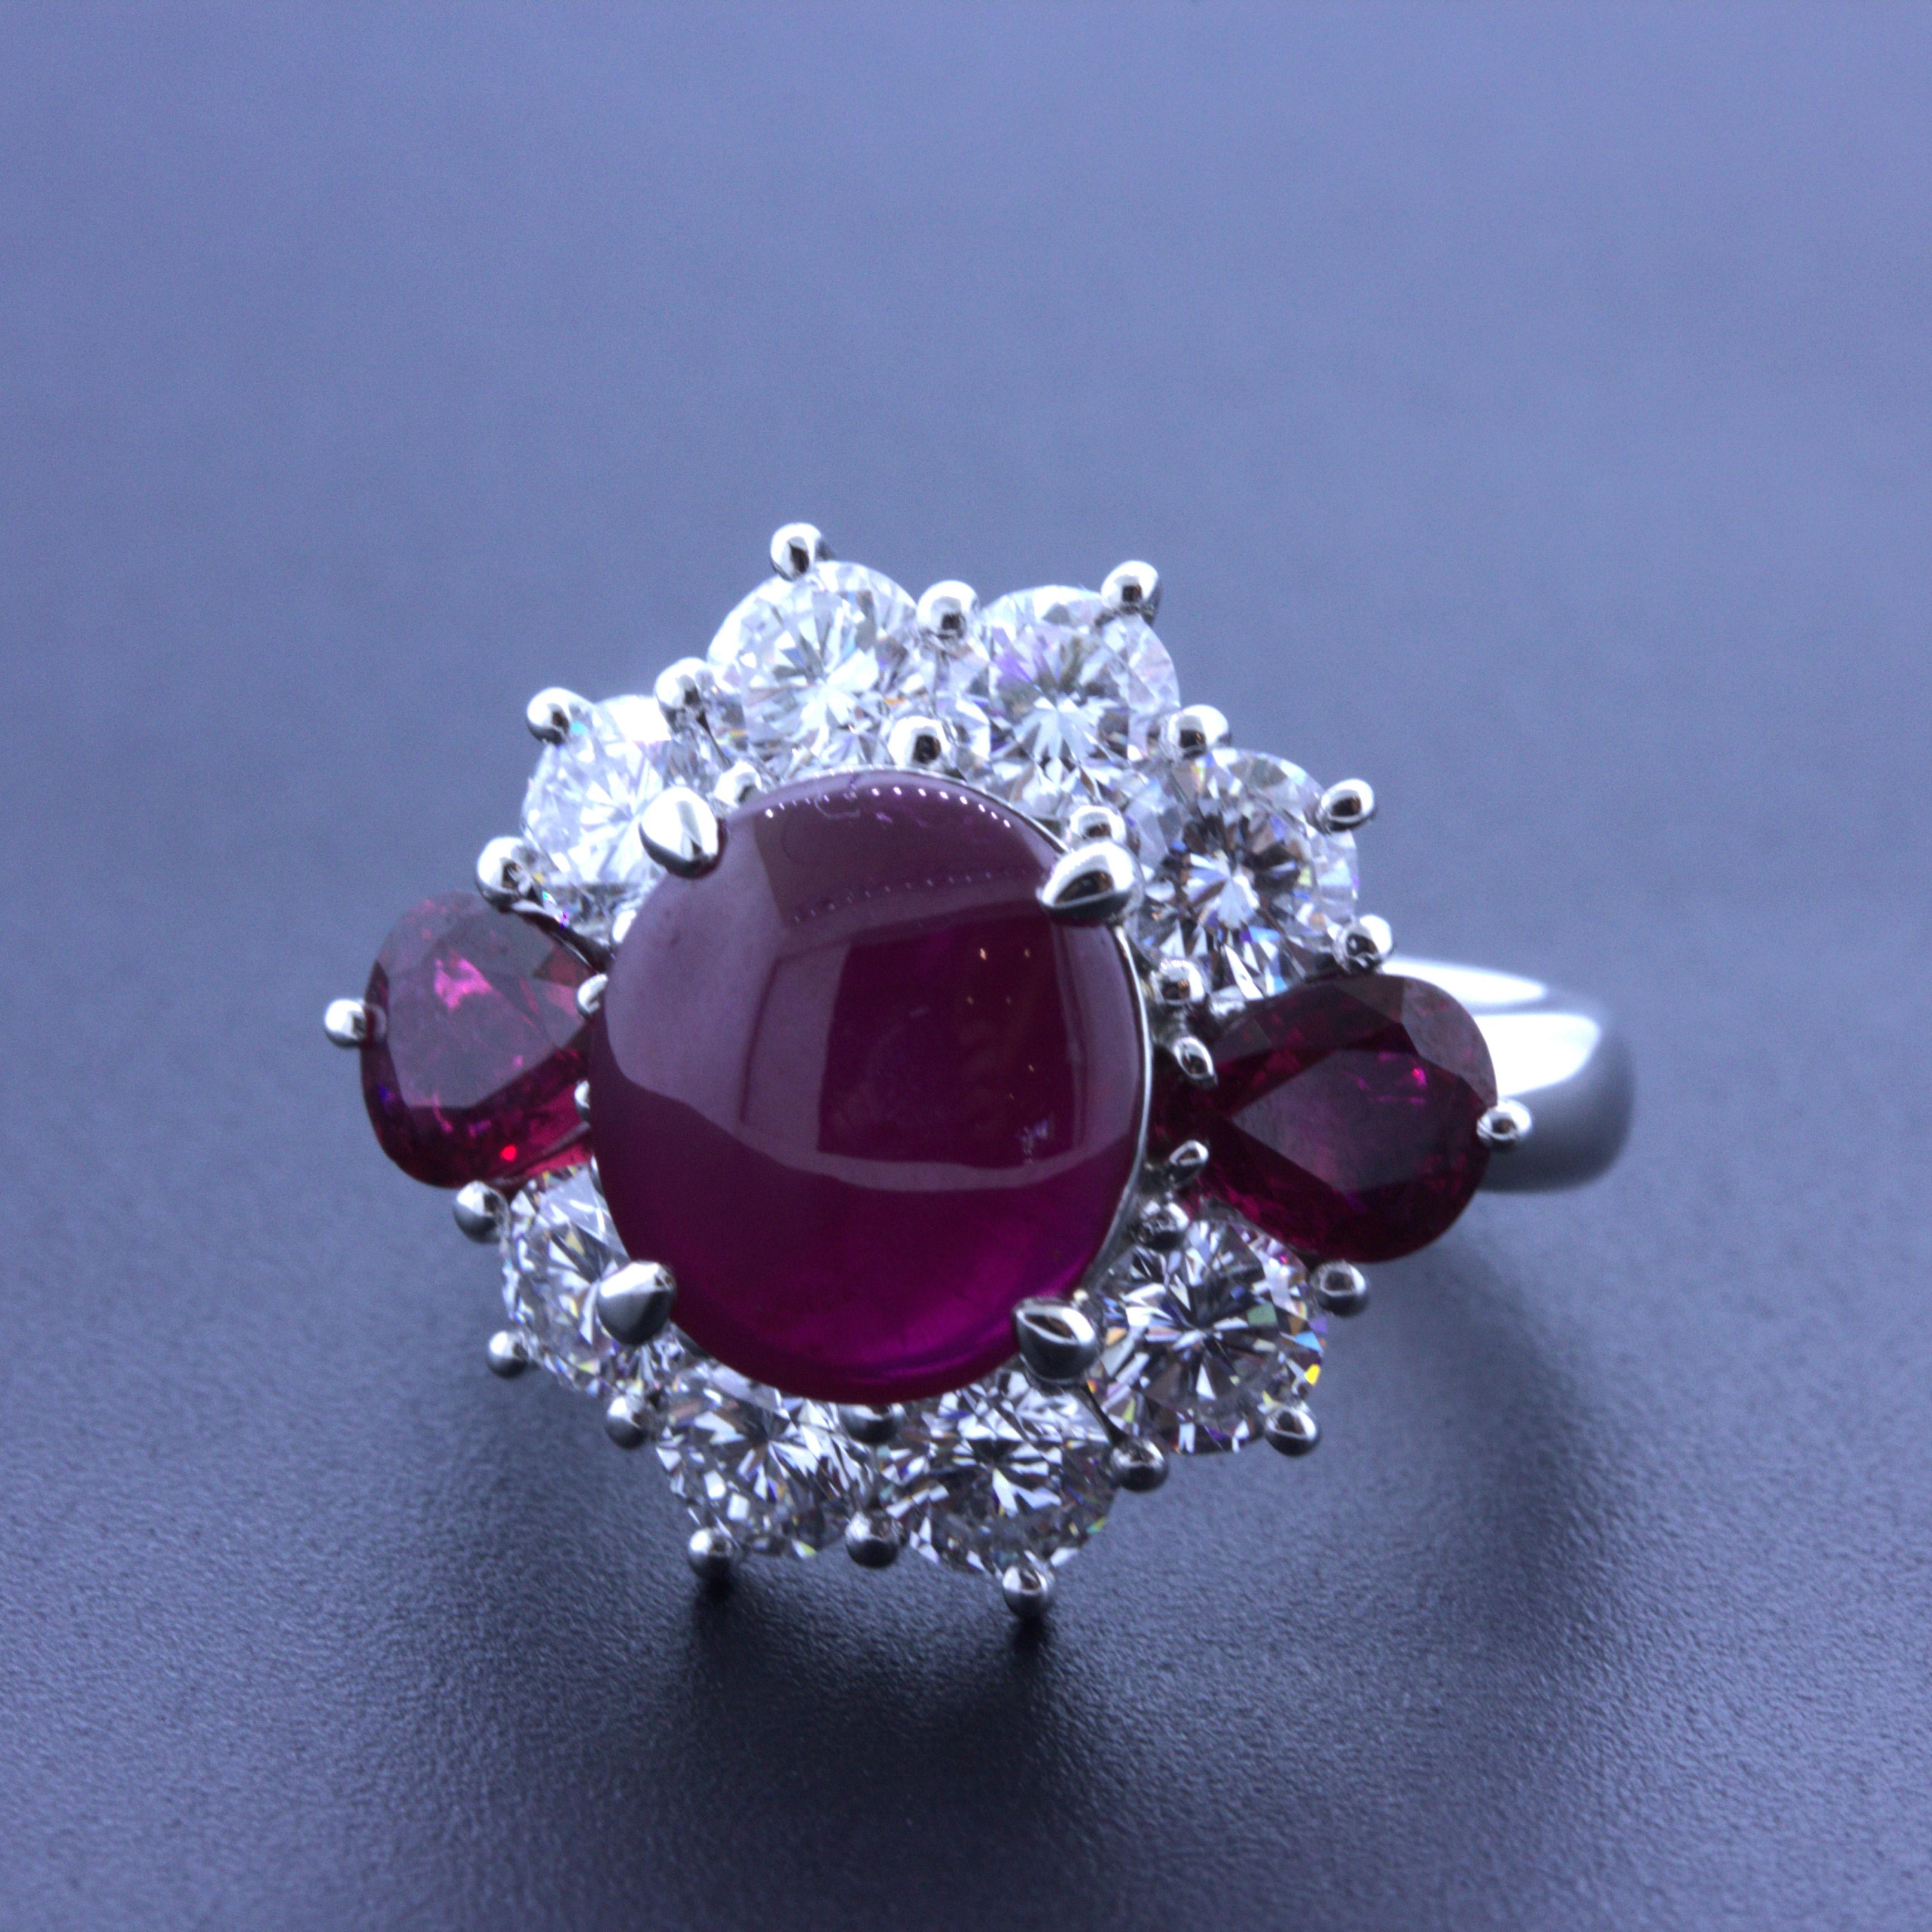 A special ring featuring very fine diamonds and gemstones. The ring features a 3.43 carat star ruby in its center which has an intense red color and a very strong 6-rayed star. When a light hits its top, you can see all 6 rays stretch strongly